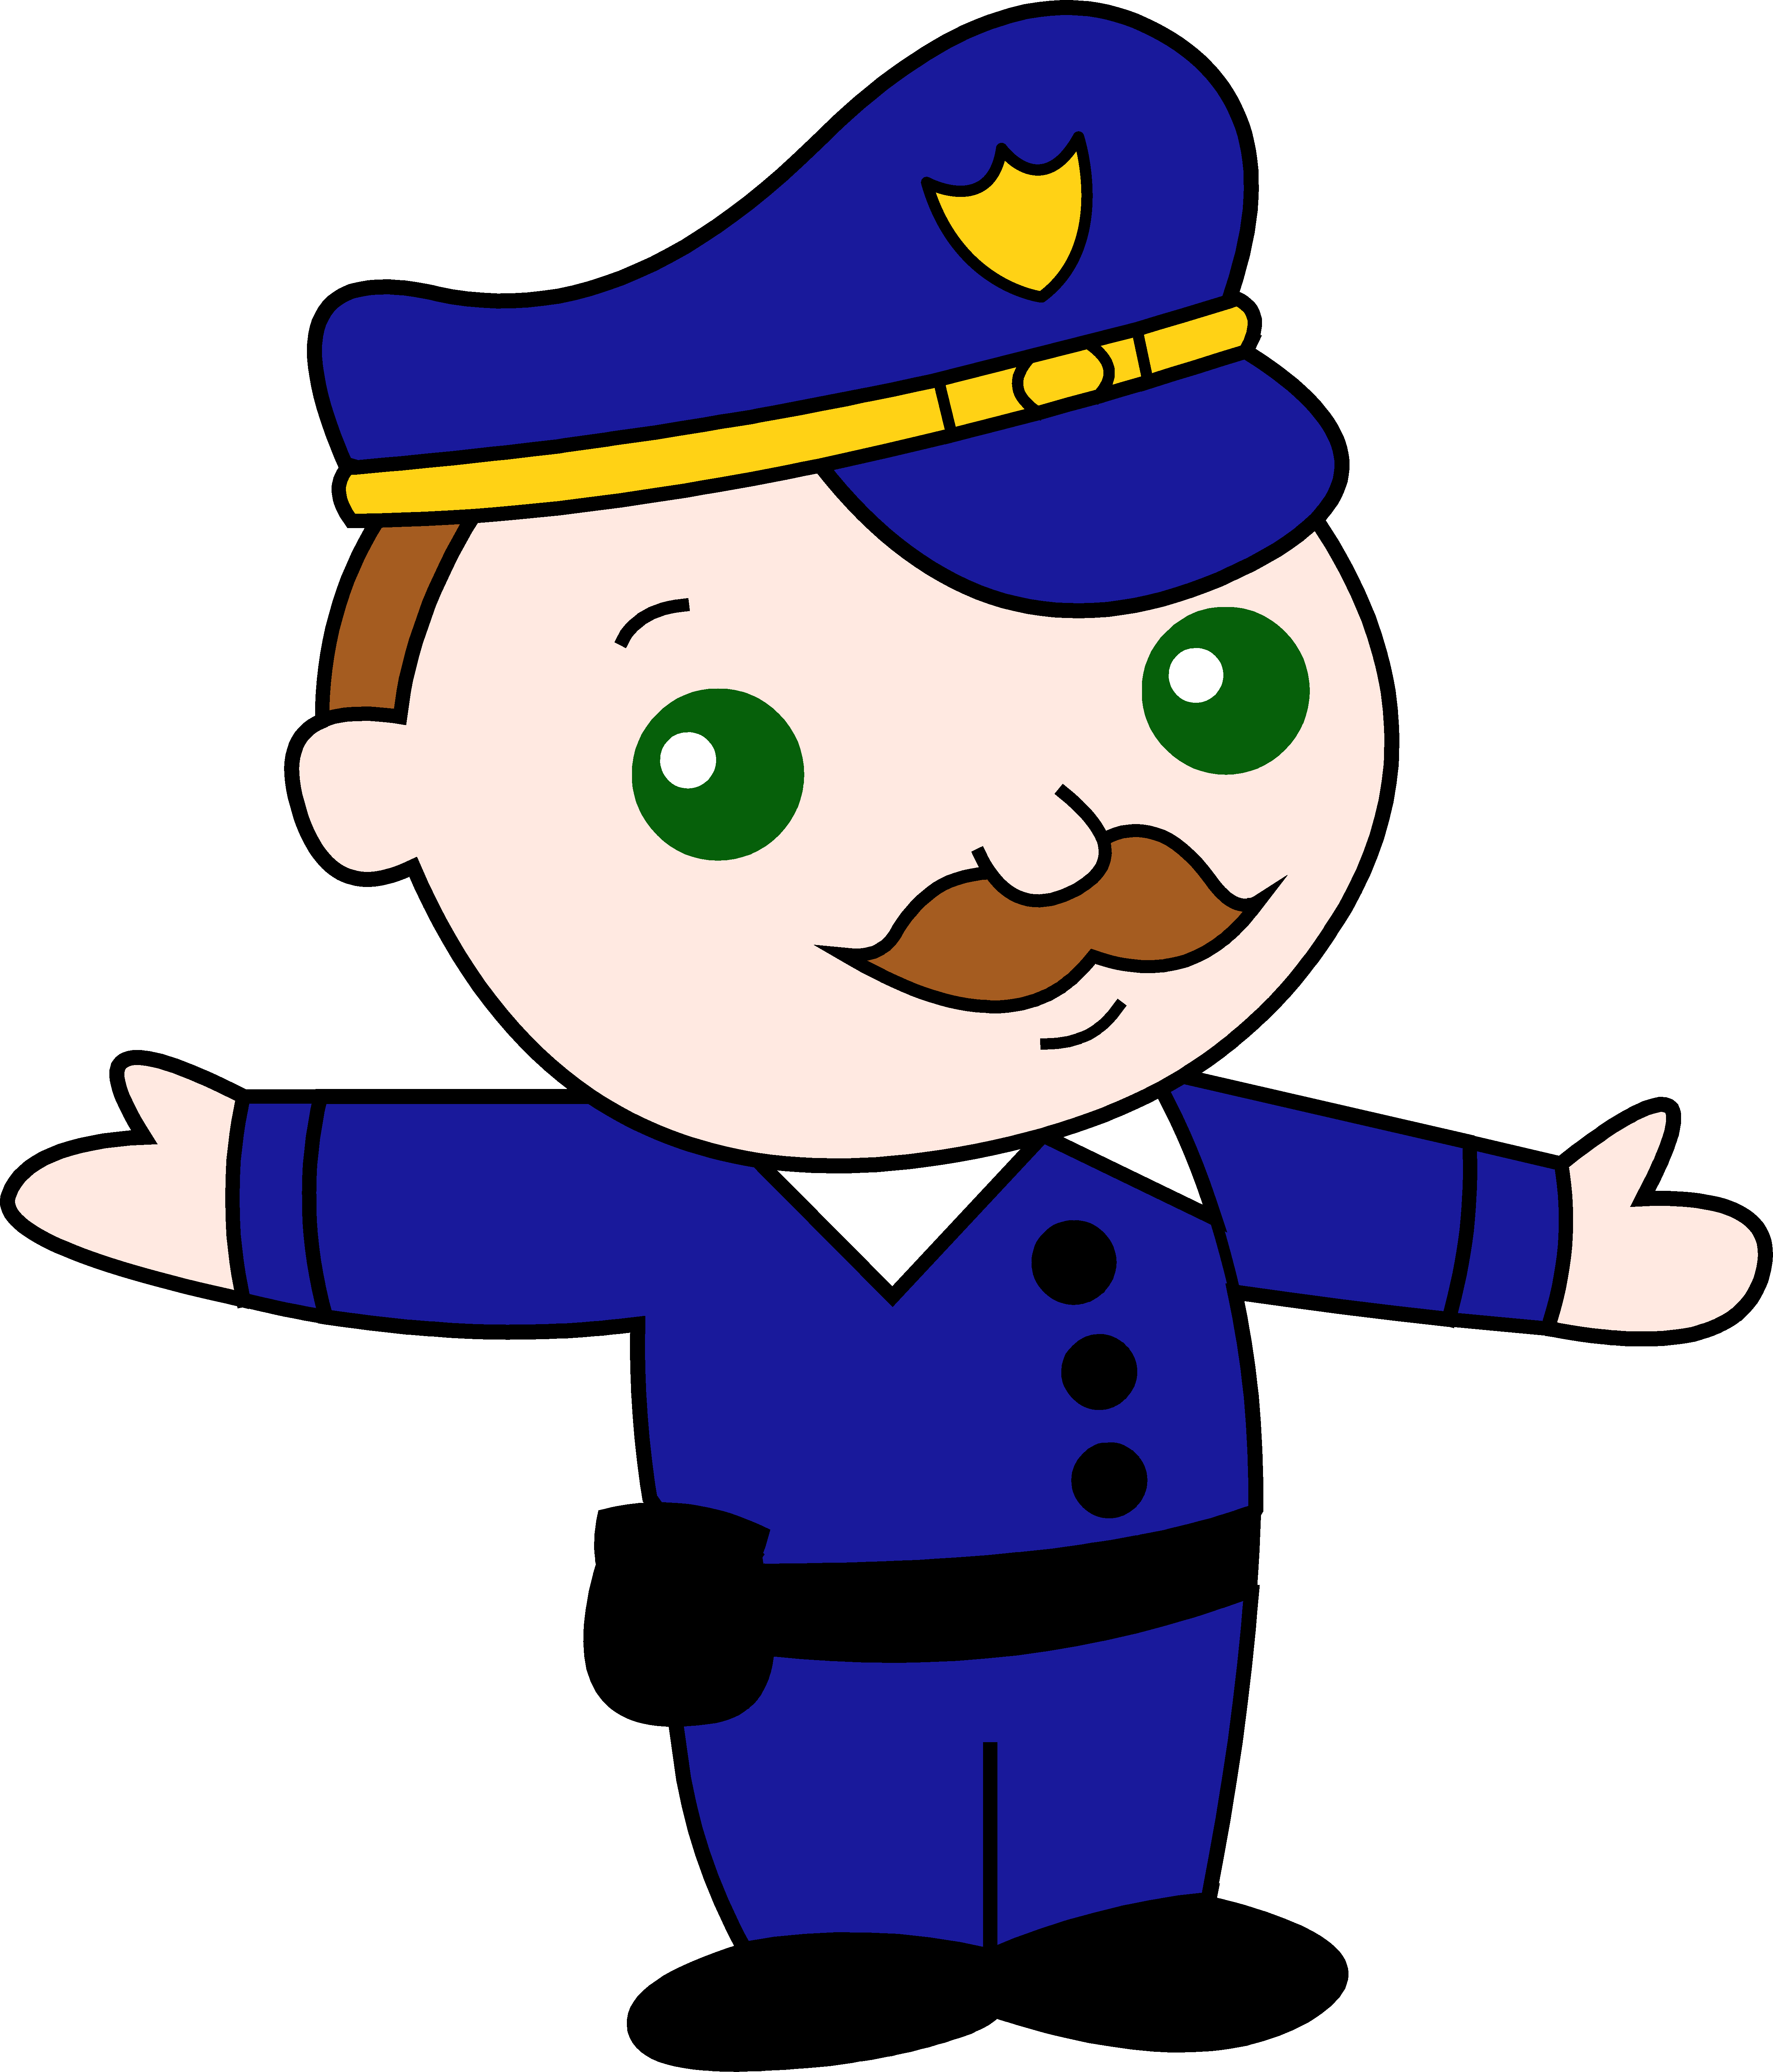 Police Officer Clipart | Clipart library - Free Clipart Images